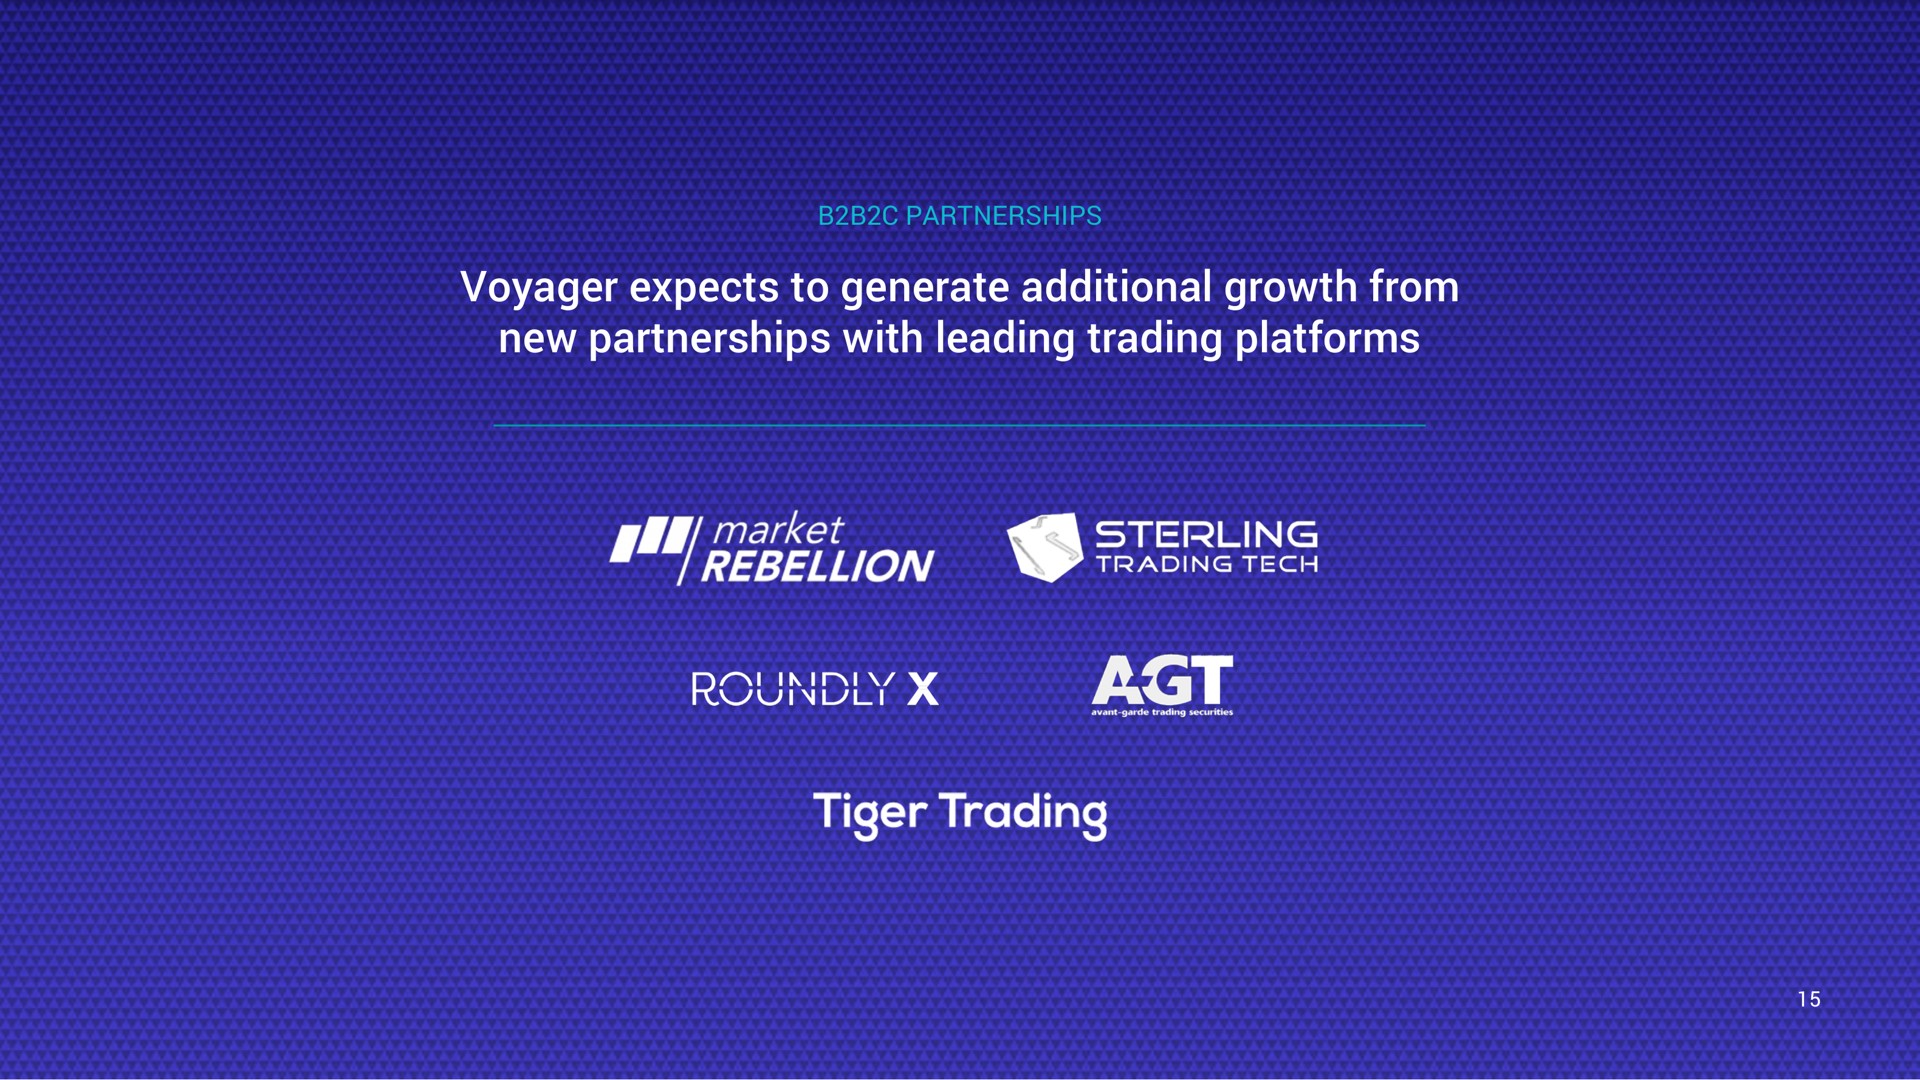 partnerships voyager expects to generate additional growth from new partnerships with leading trading platforms me tiger | Voyager Digital